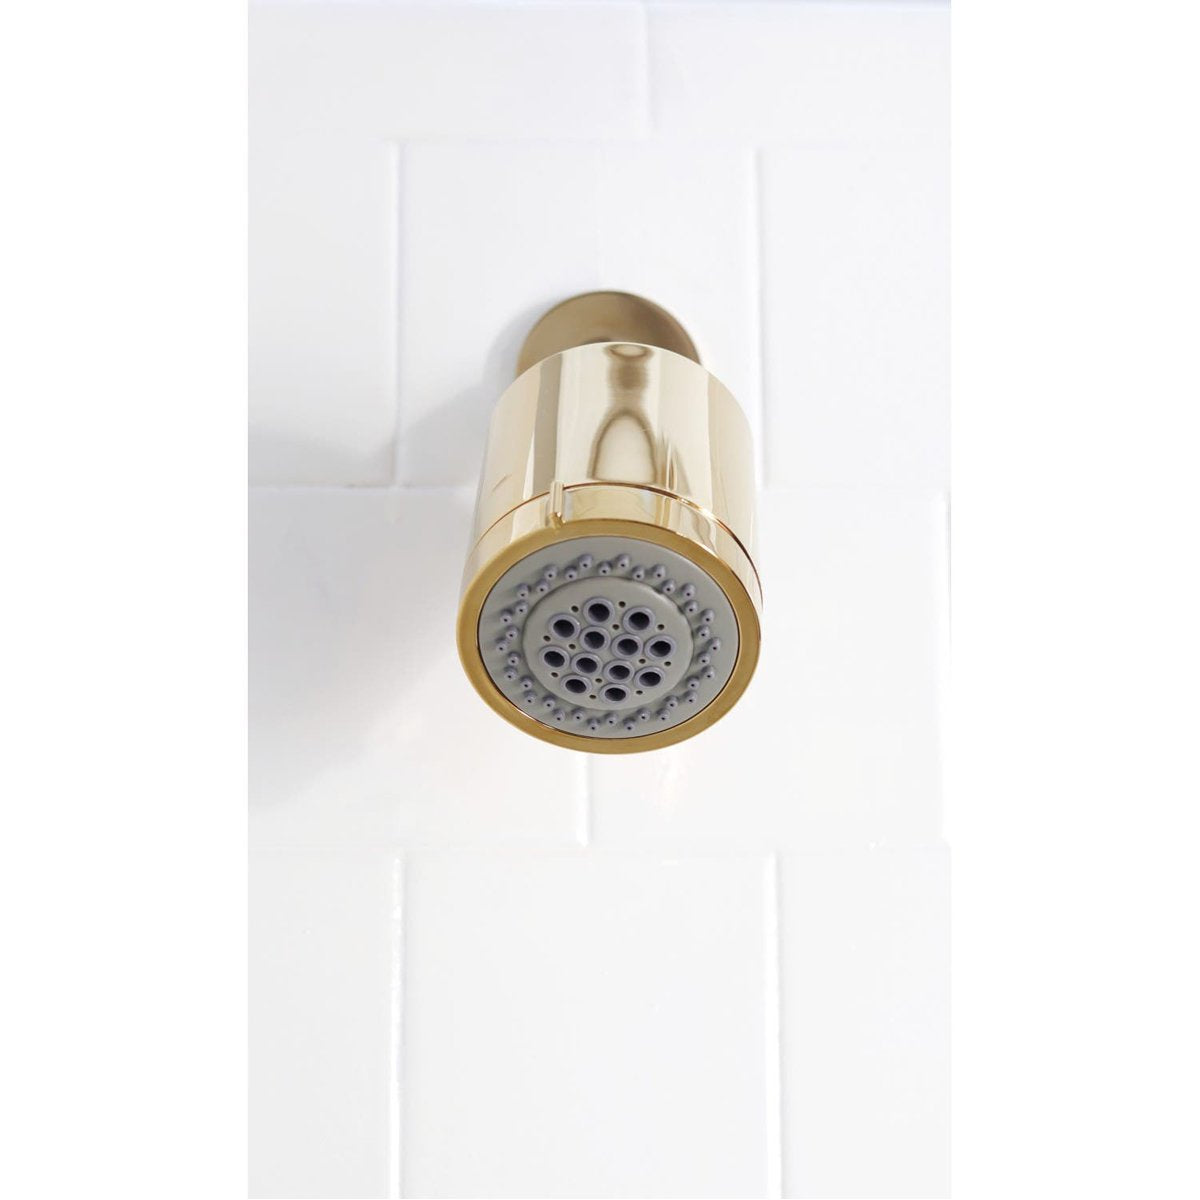 Kingston Brass Concord Three-Handle Tub and Shower Faucet